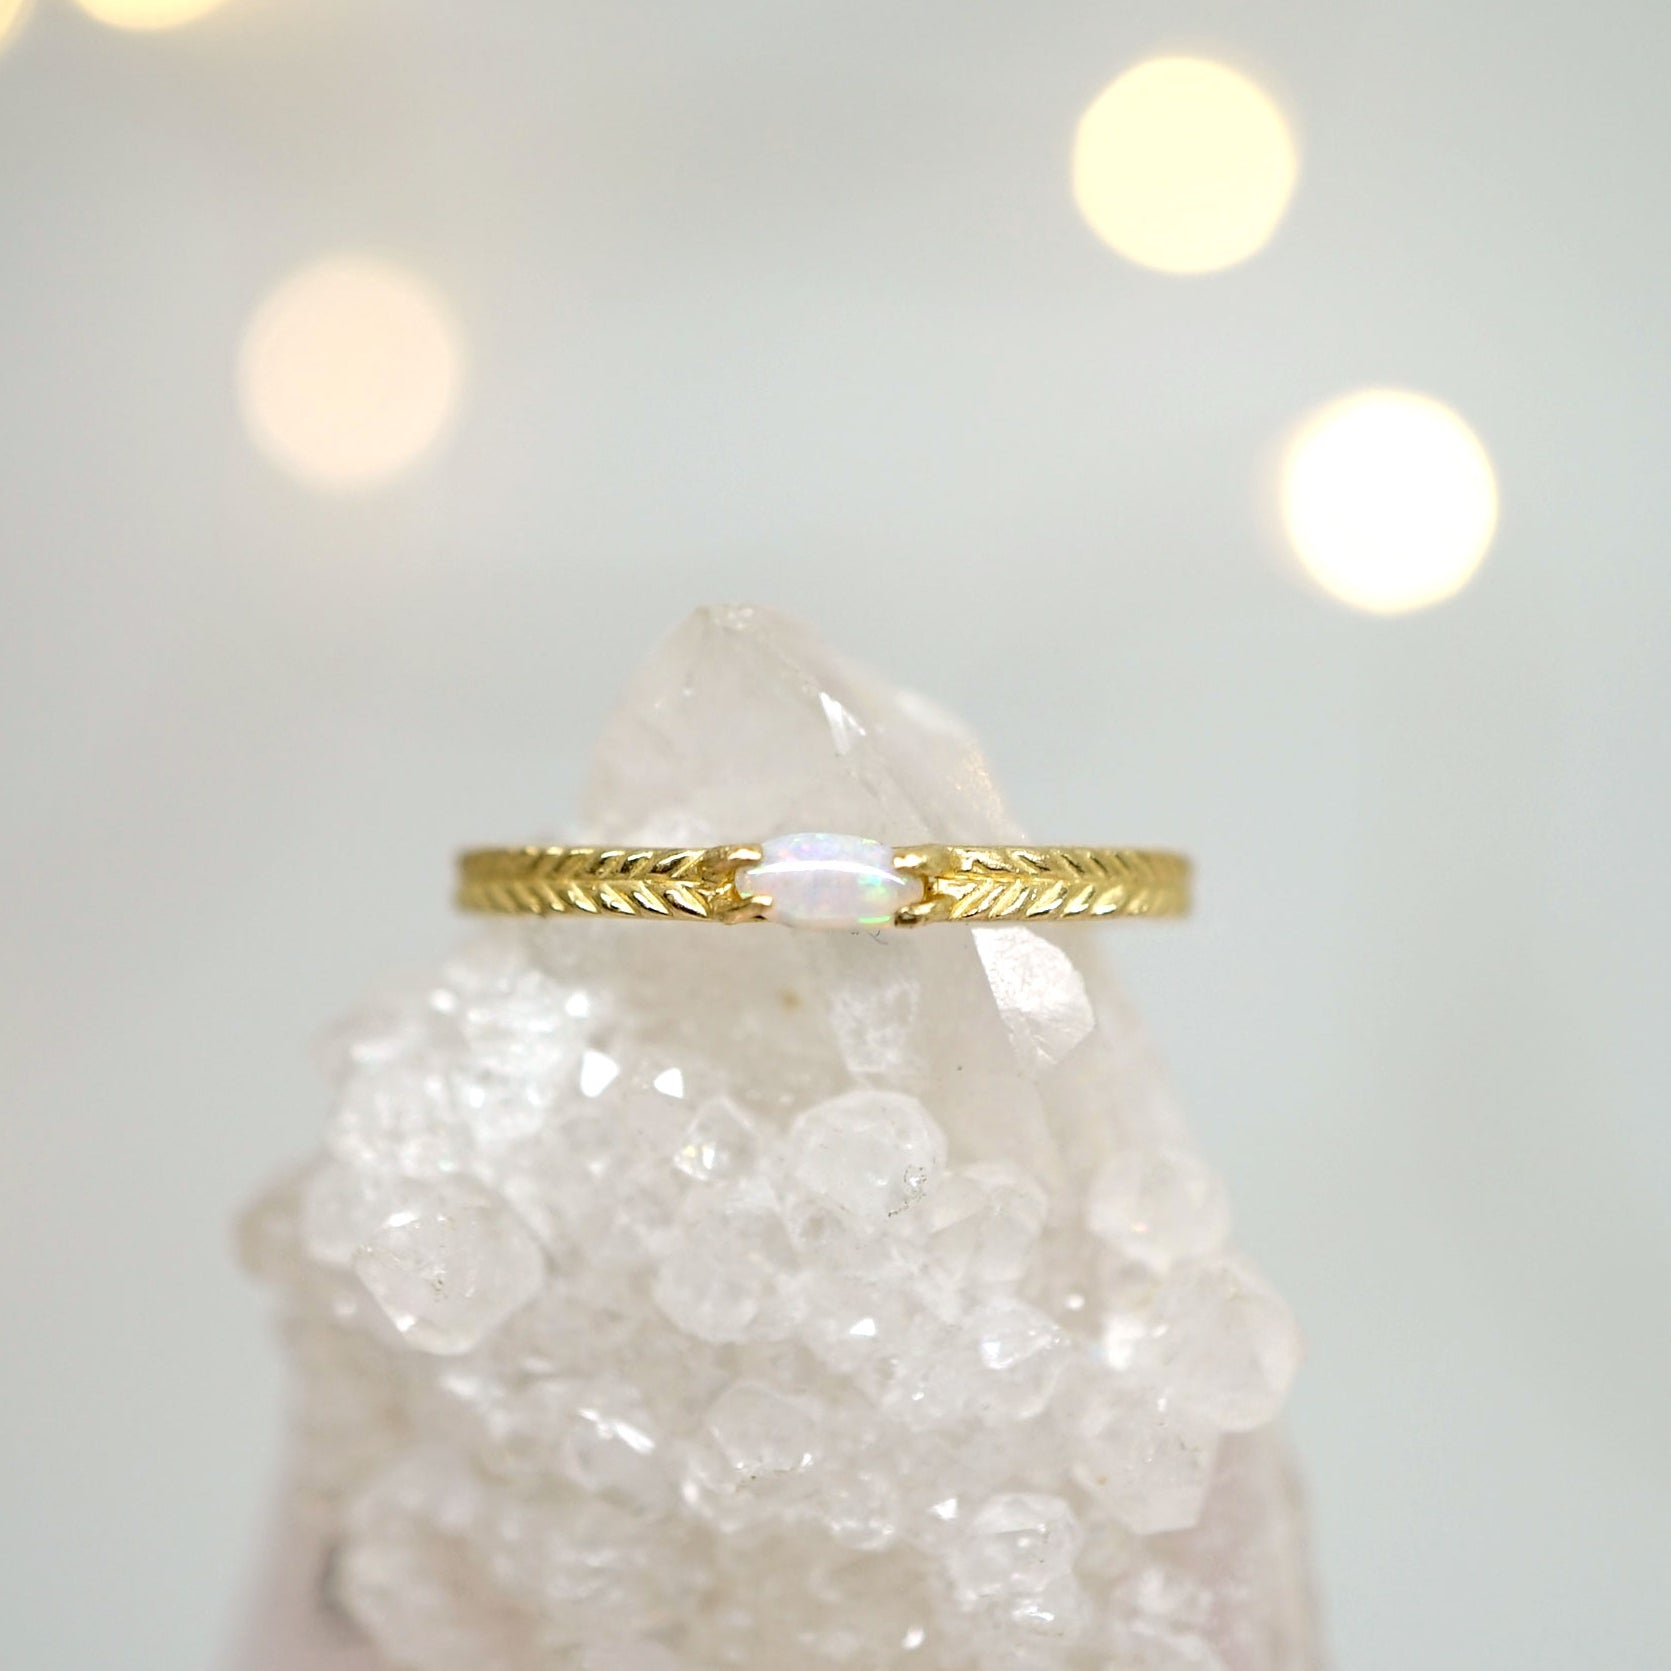 Opal solitaire ring with details in 14K gold